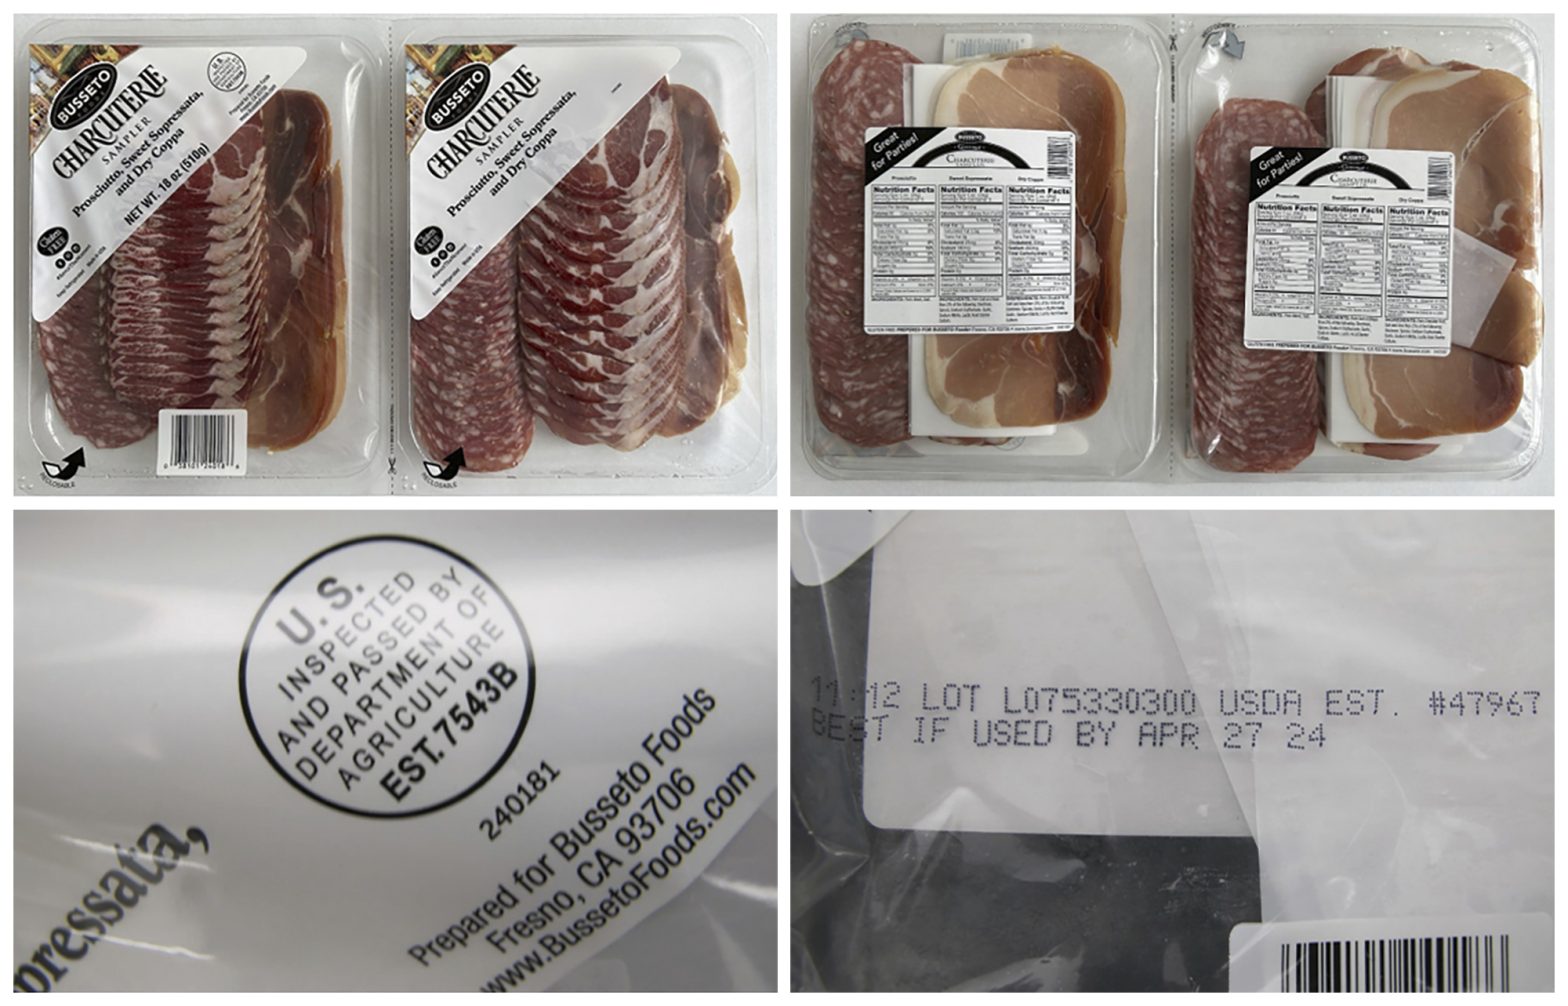 CDC Expands Warning About Charcuterie Meat Trays as Salmonella Cases Double